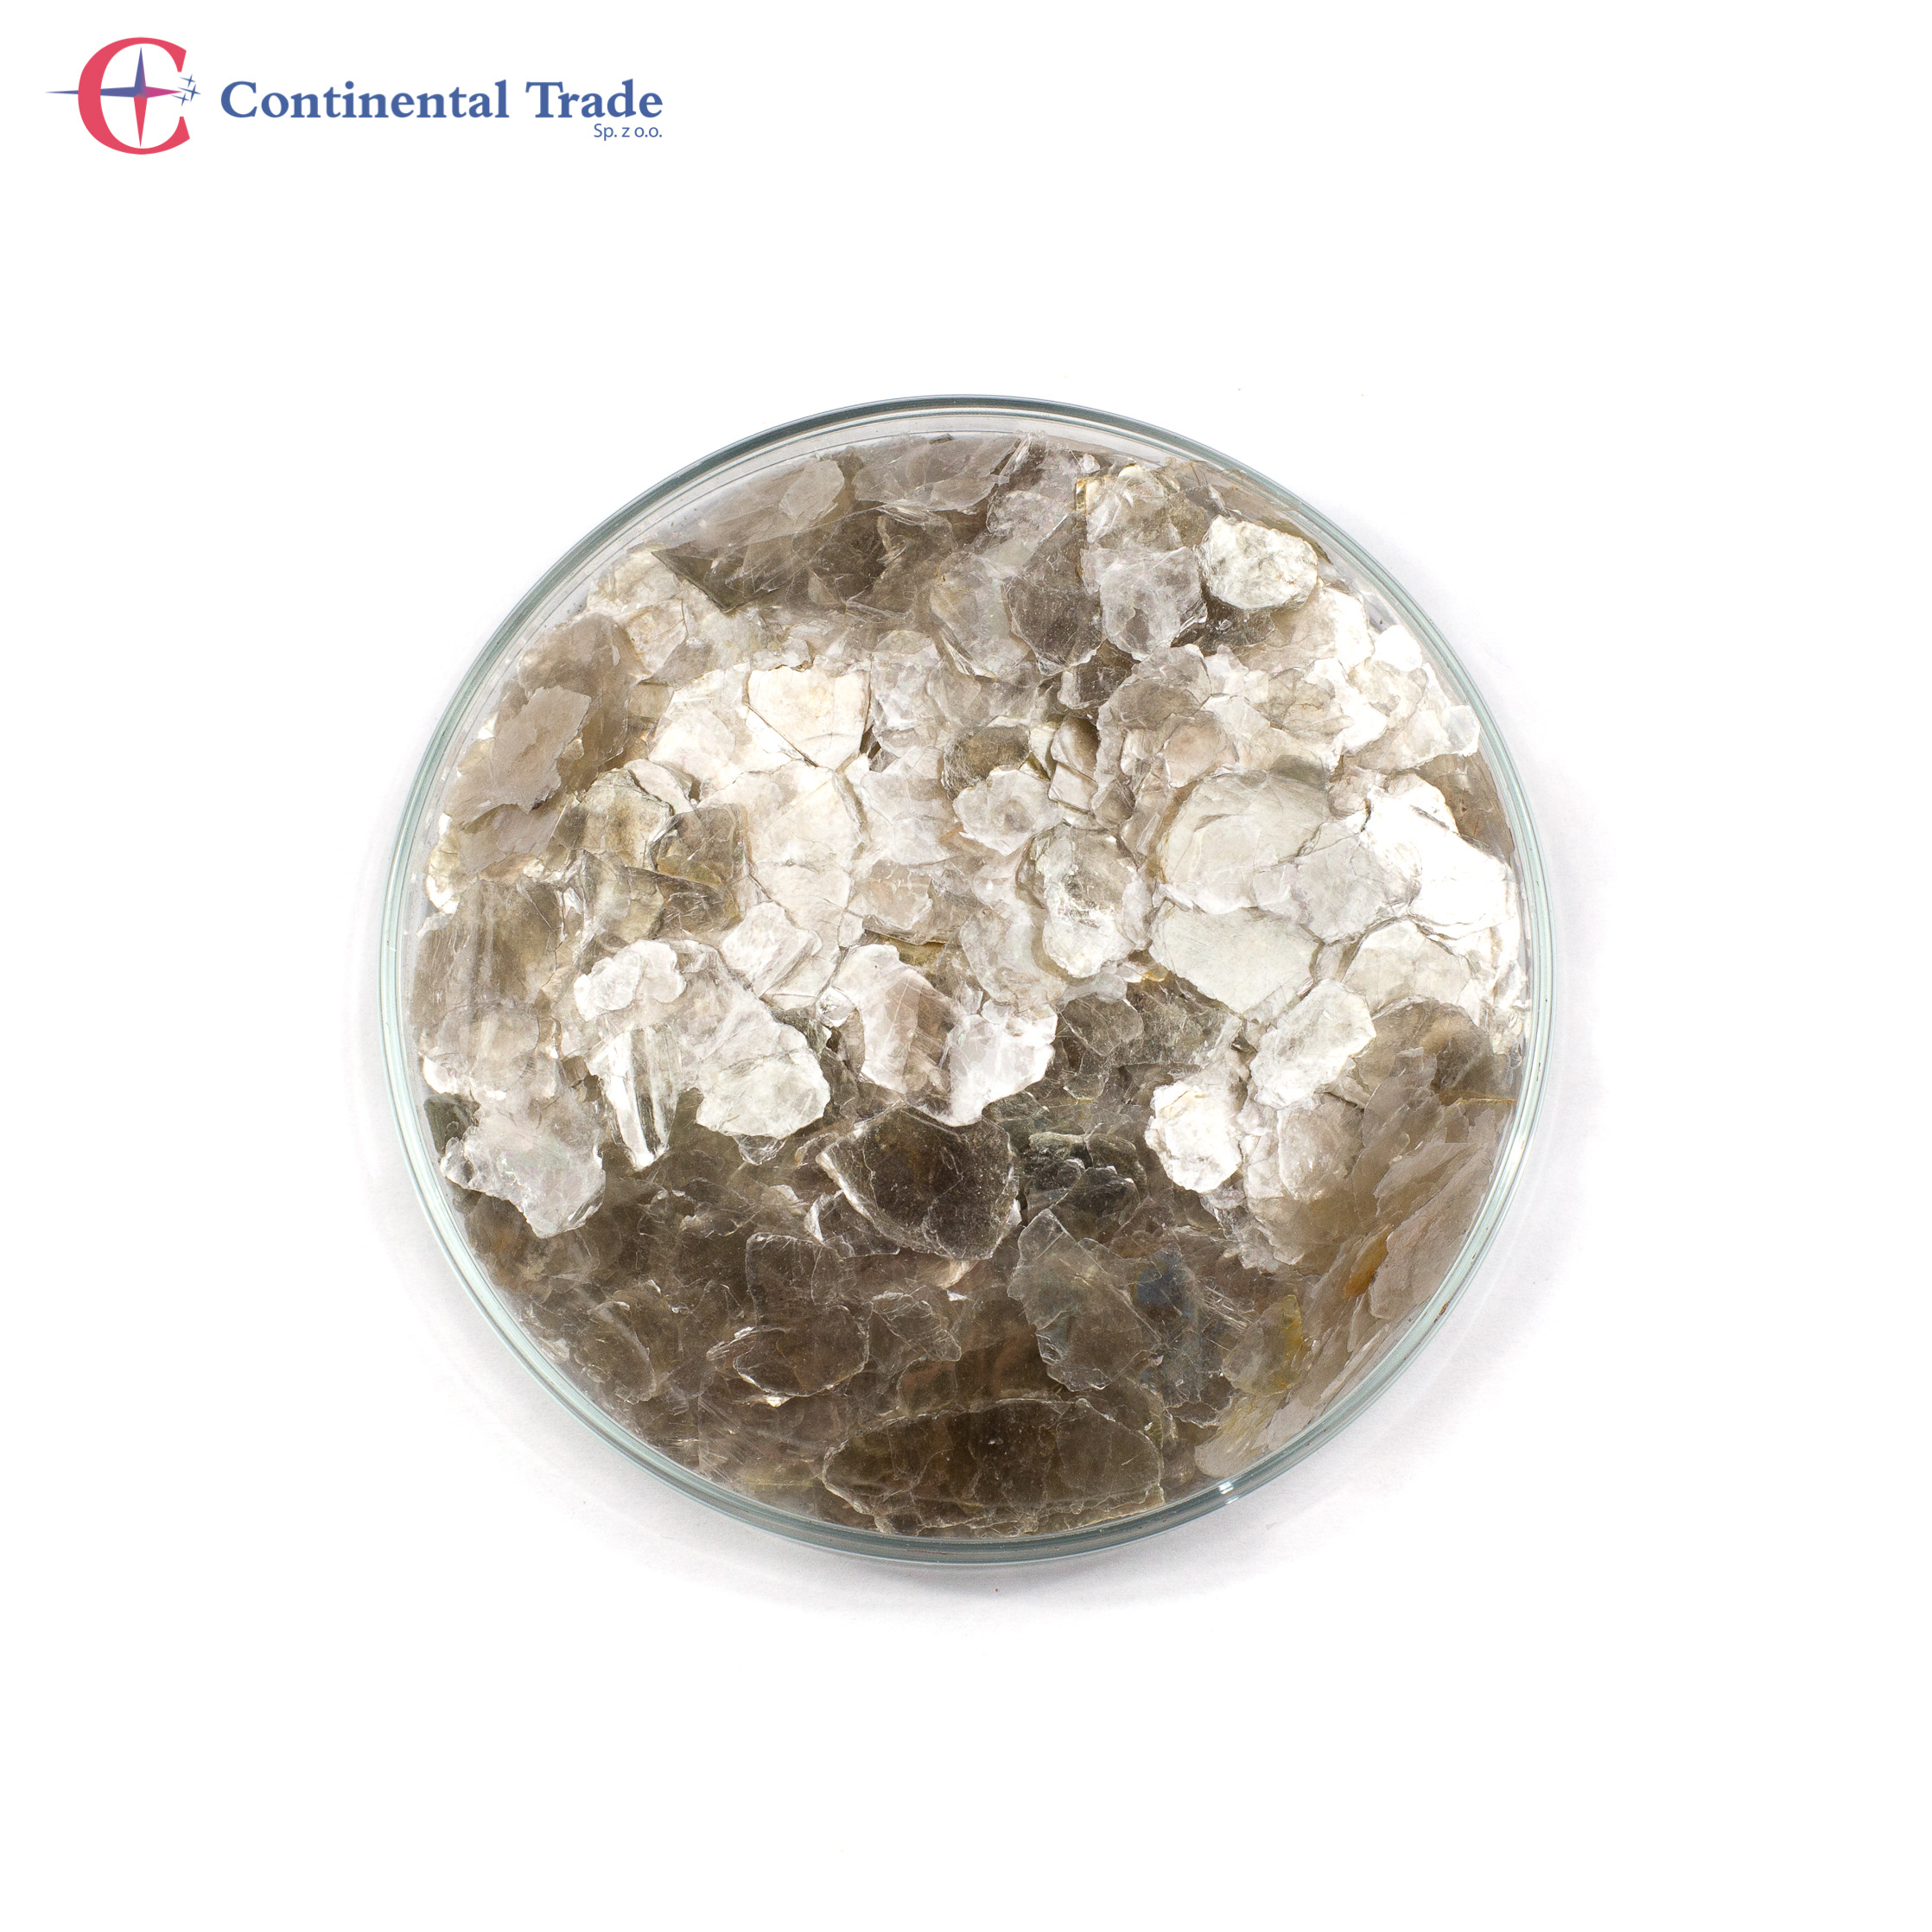 Natural Mica Flakes/Synthetic Mica Flakes in Good Quality Manufacturer  Supply - China Natural Mica Flakes, Synthetic Mica Flakes